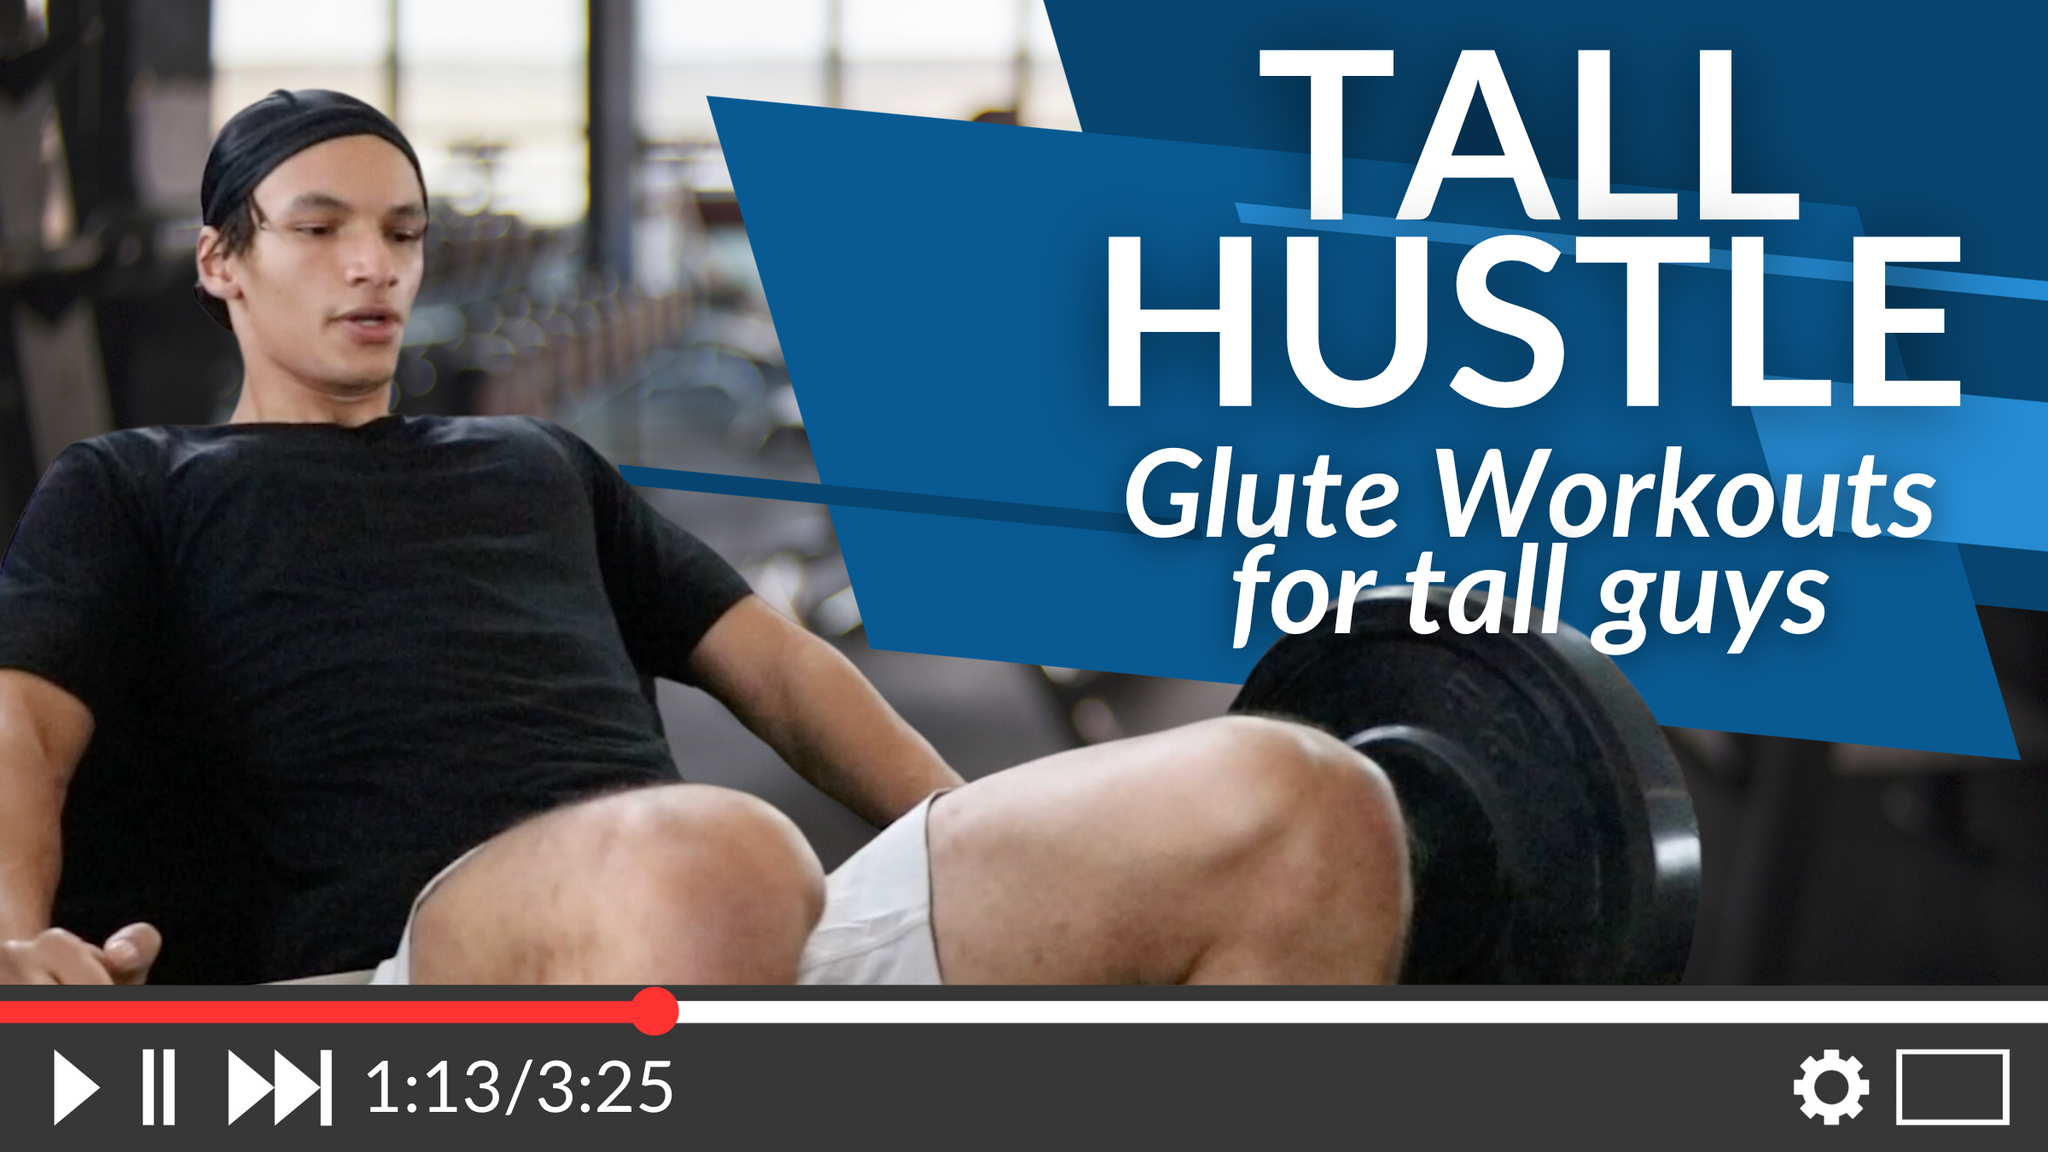 Tall Hustle Episode 2: Glute Workouts for Tall Guys